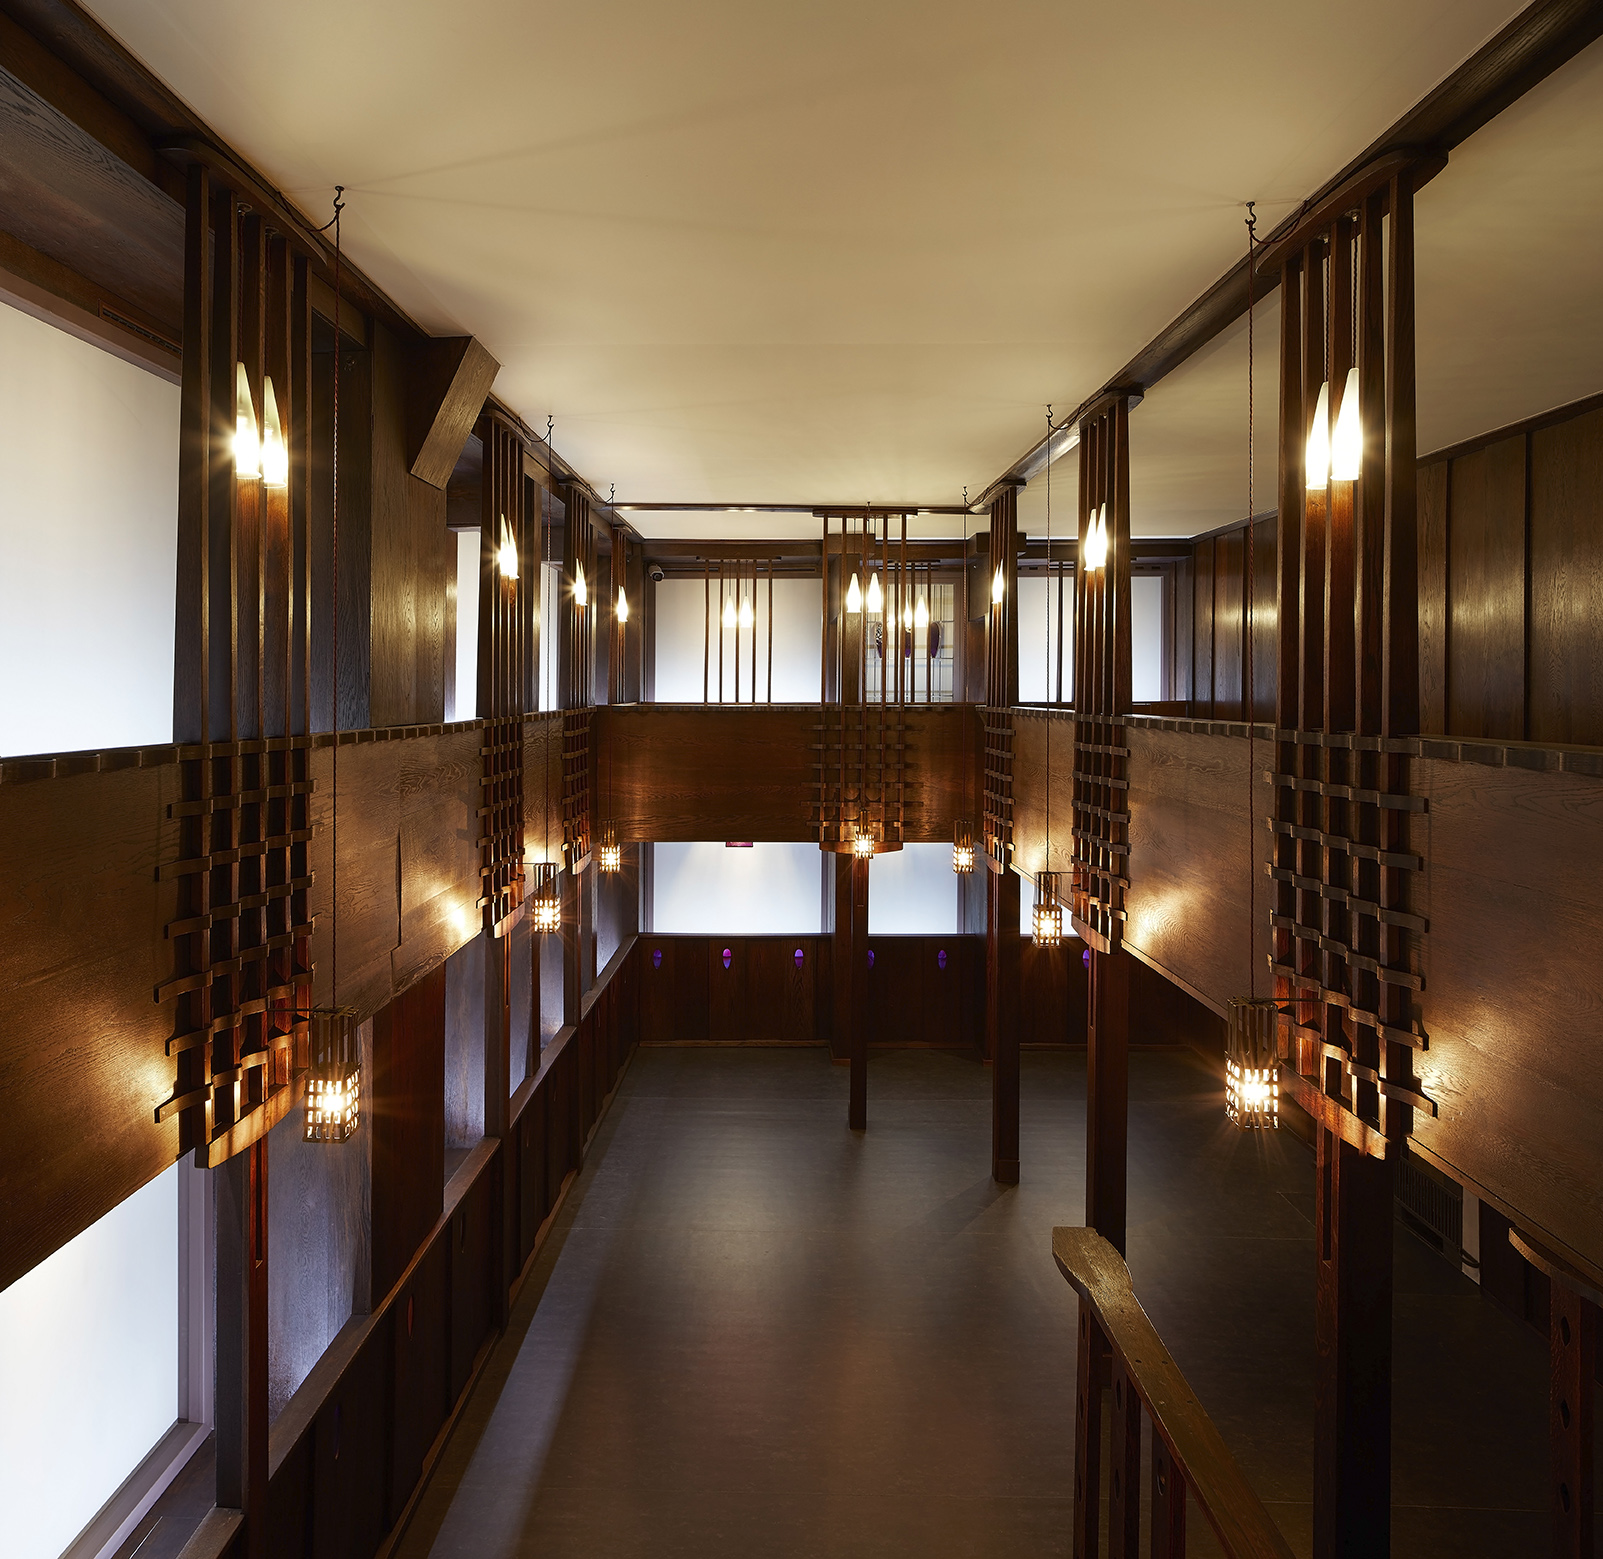 Charles Rennie Mackintosh's Oak Room restored, conserved and reconstructed through a partnership between V&A Dundee, Glasgow Museums and Dundee City Council.